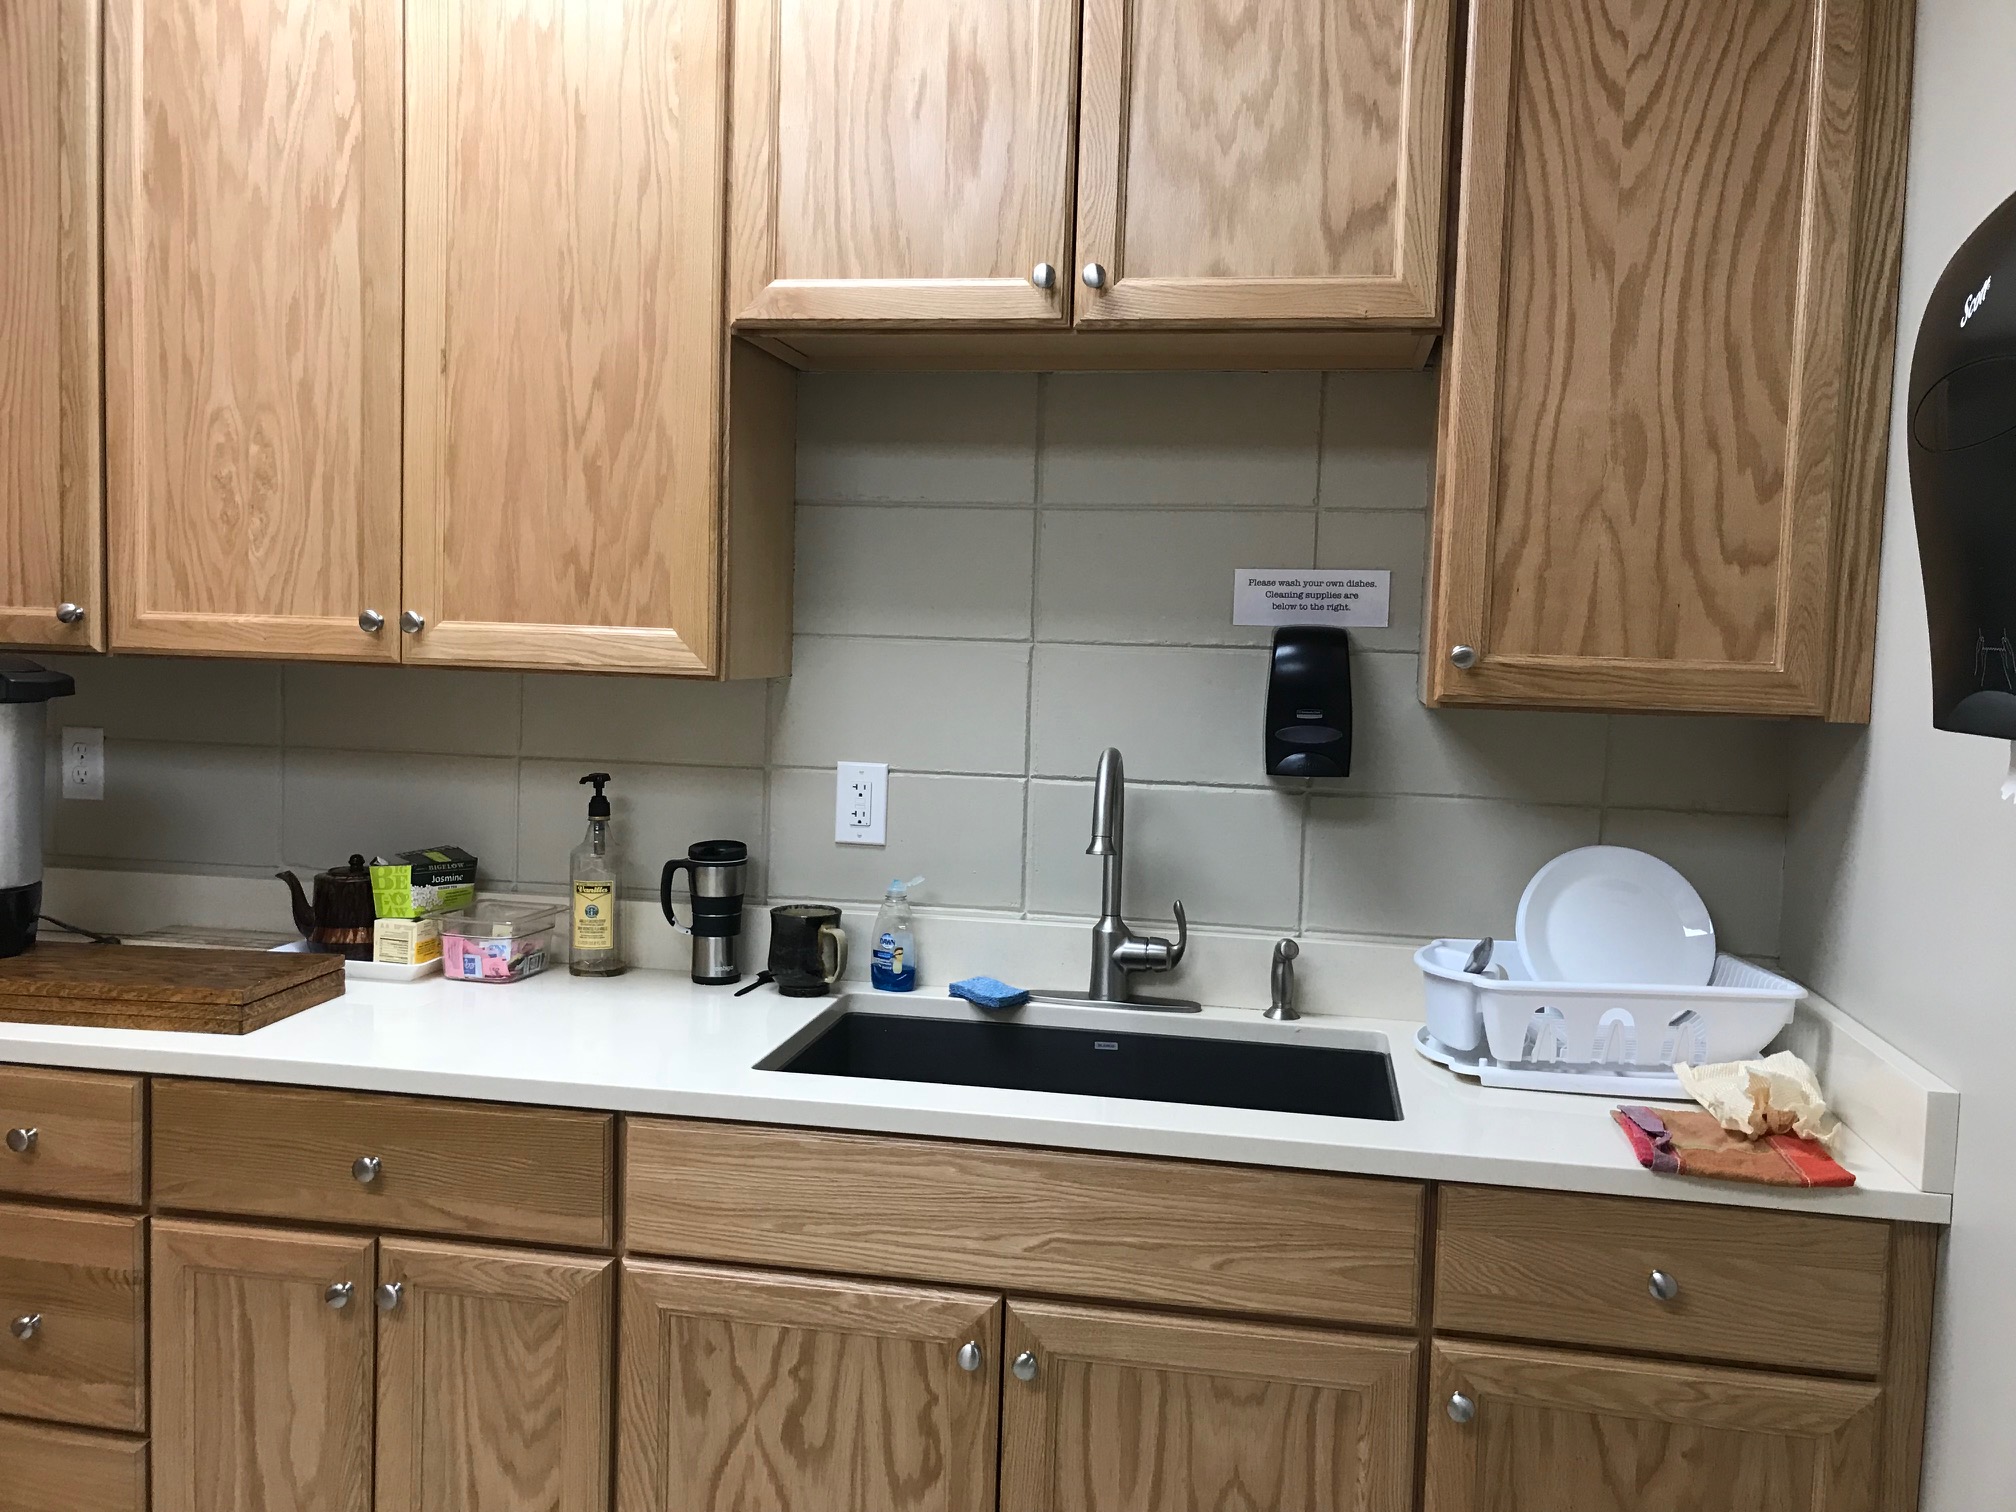 The AFTER photo of the same corner of the kitchen.